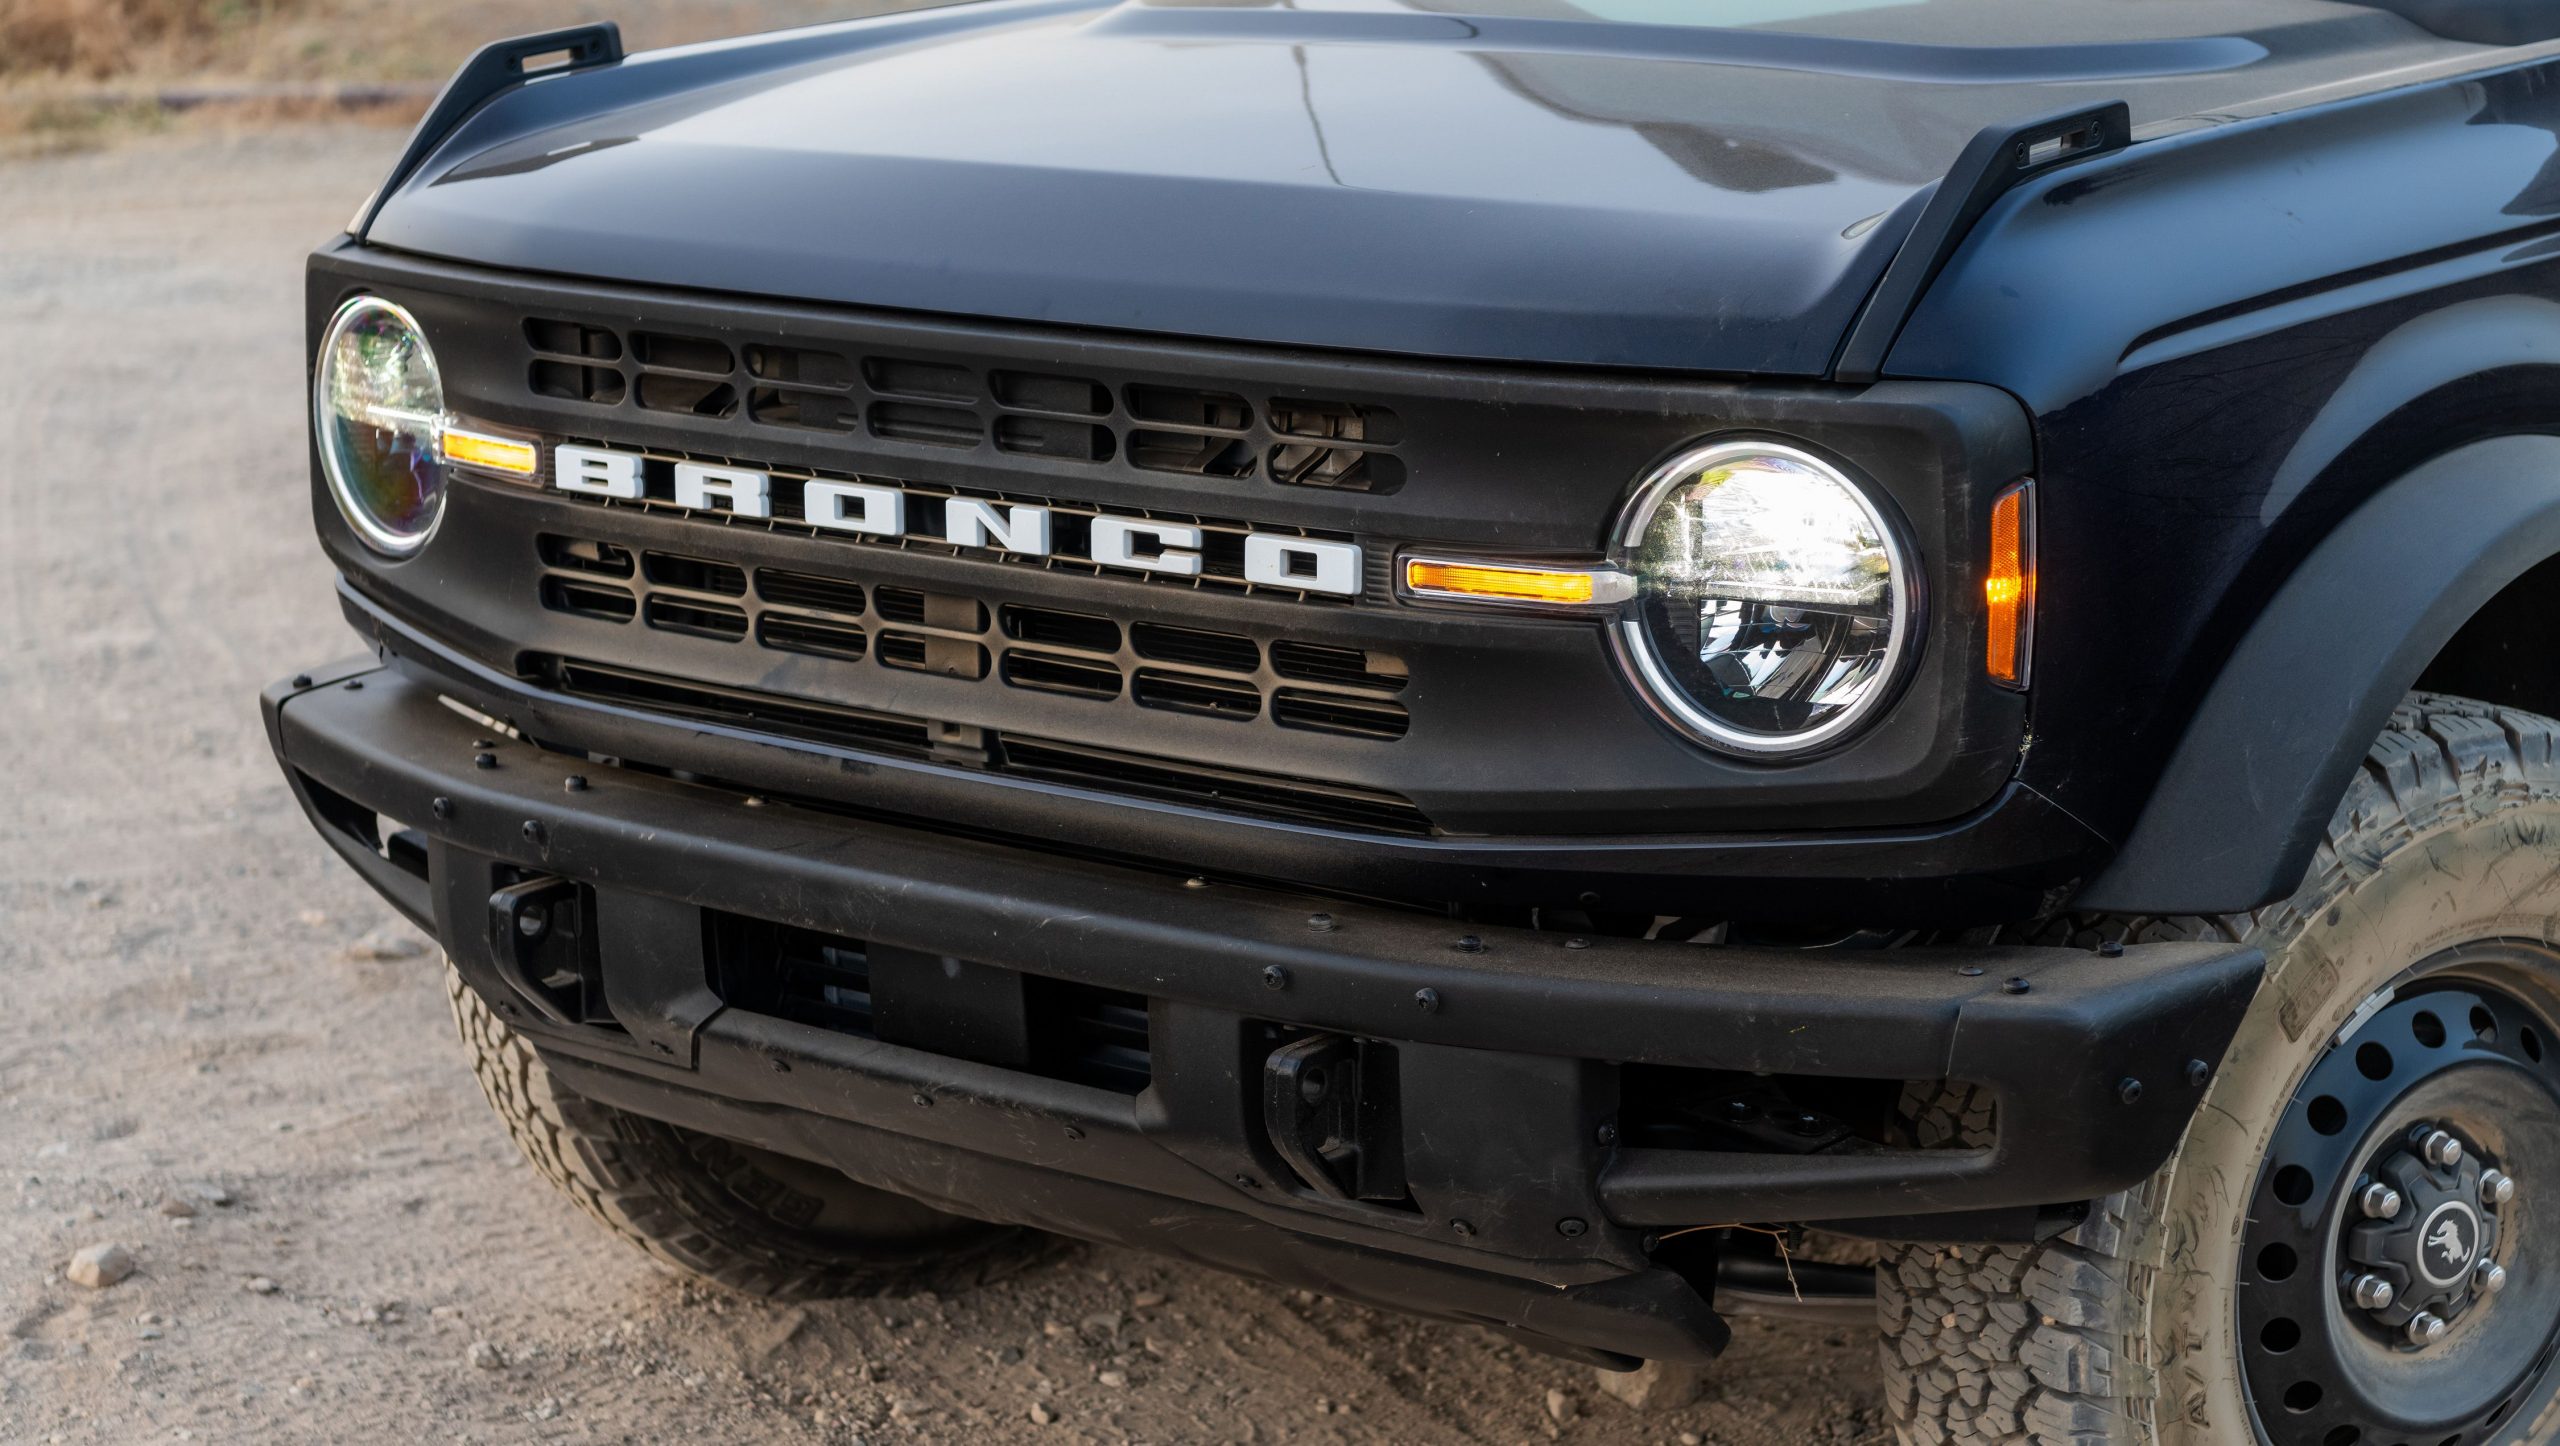 Ford Cancels Plans for a Bronco-Based Pickup Truck